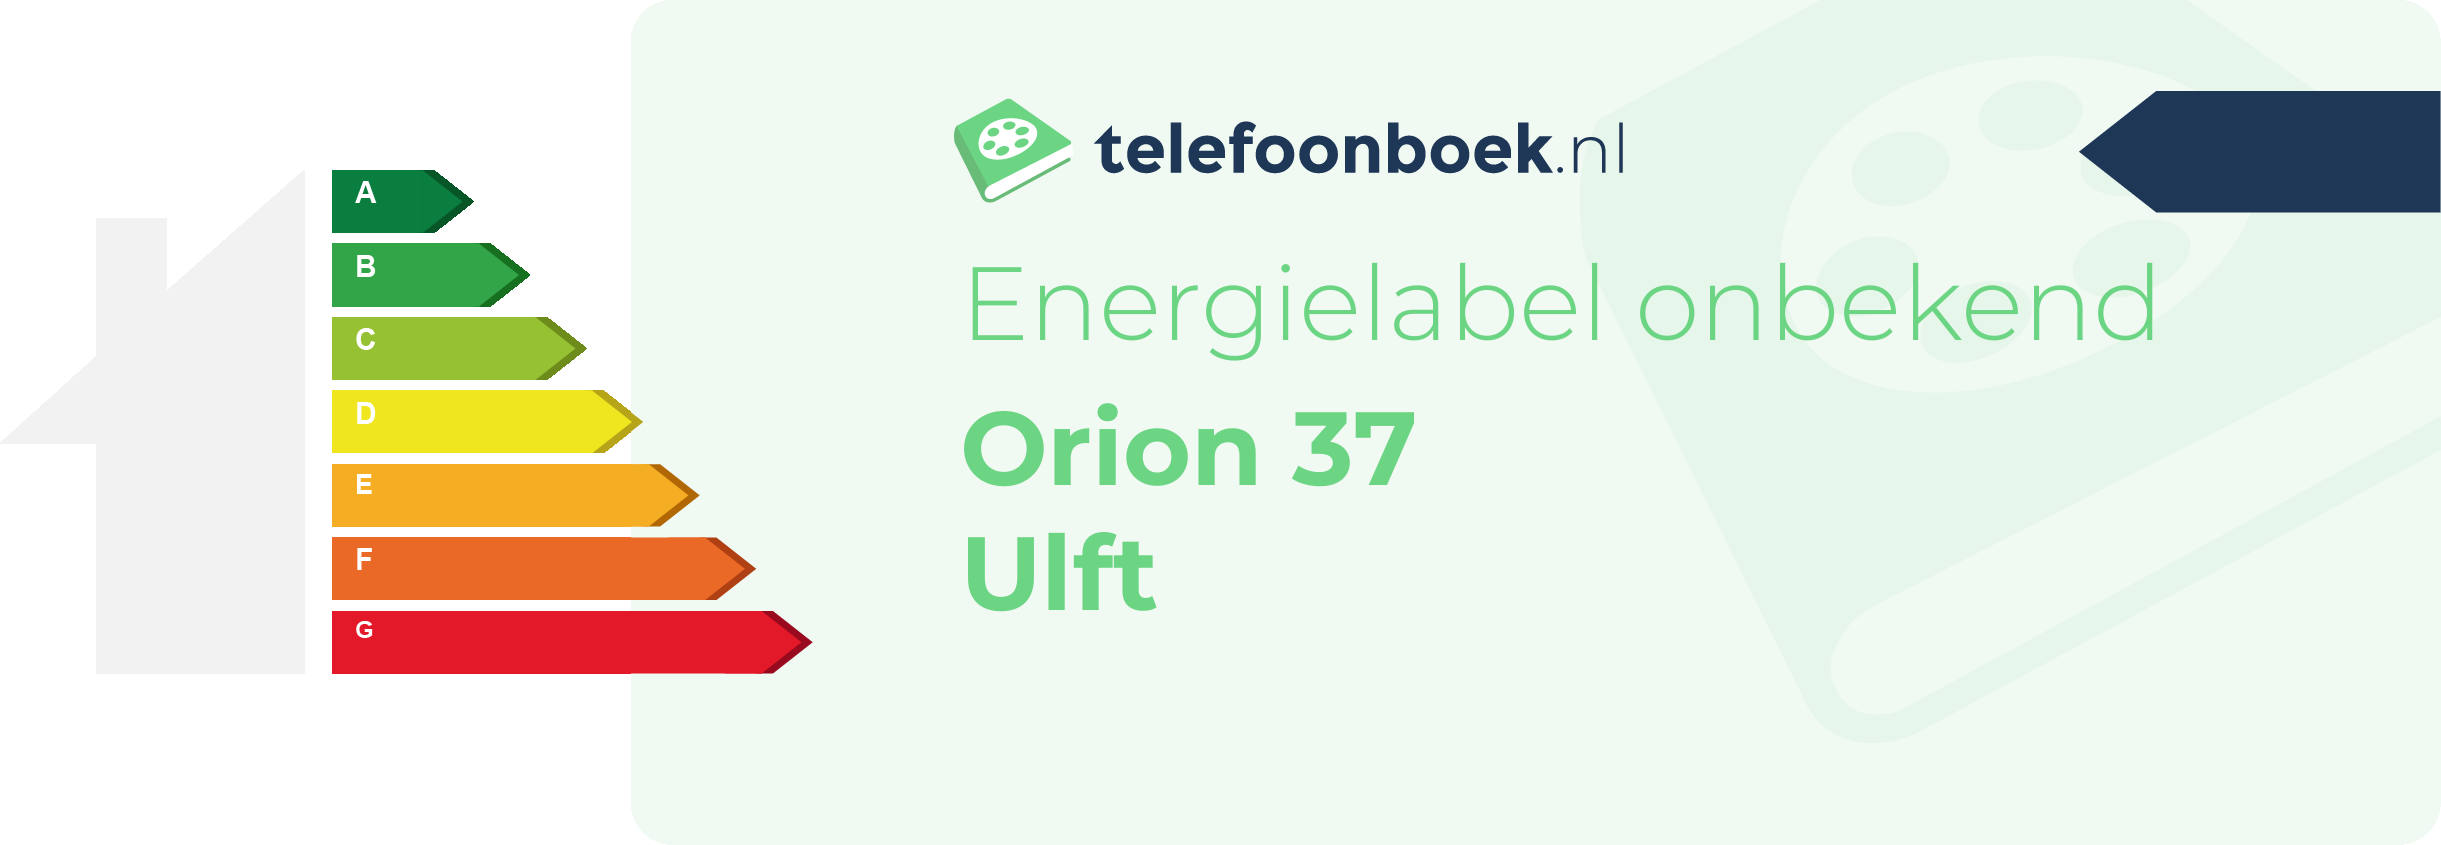 Energielabel Orion 37 Ulft